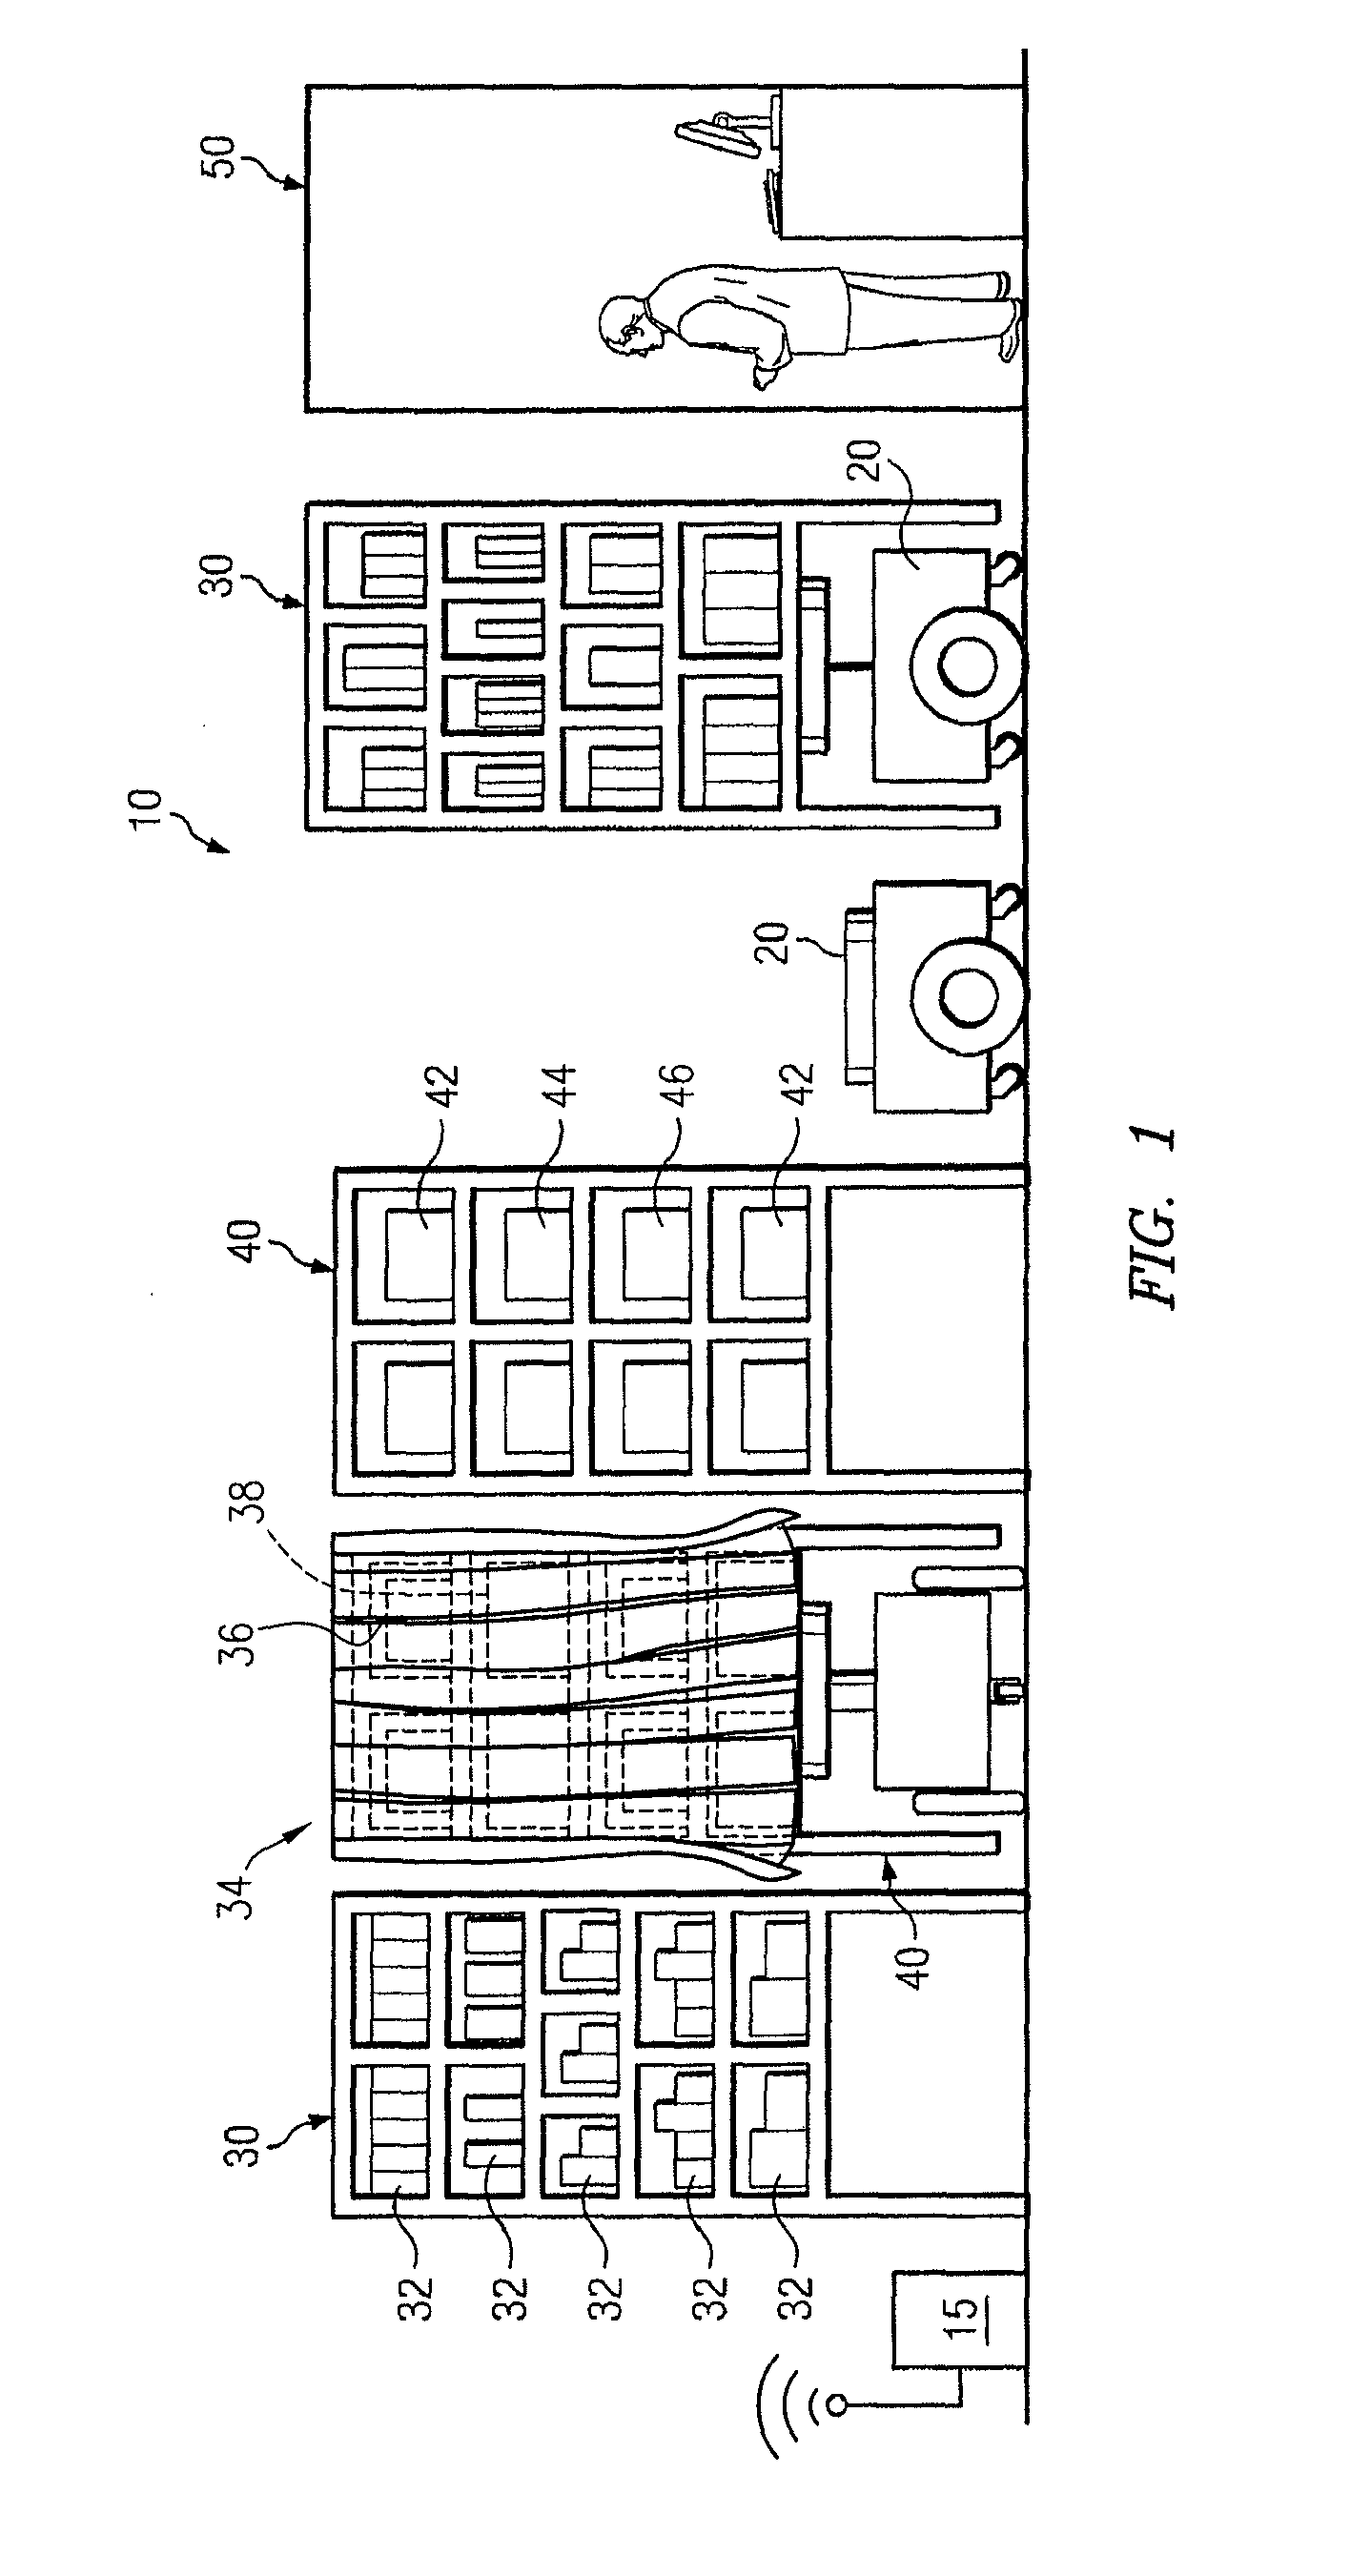 Inventory system with climate-controlled inventory